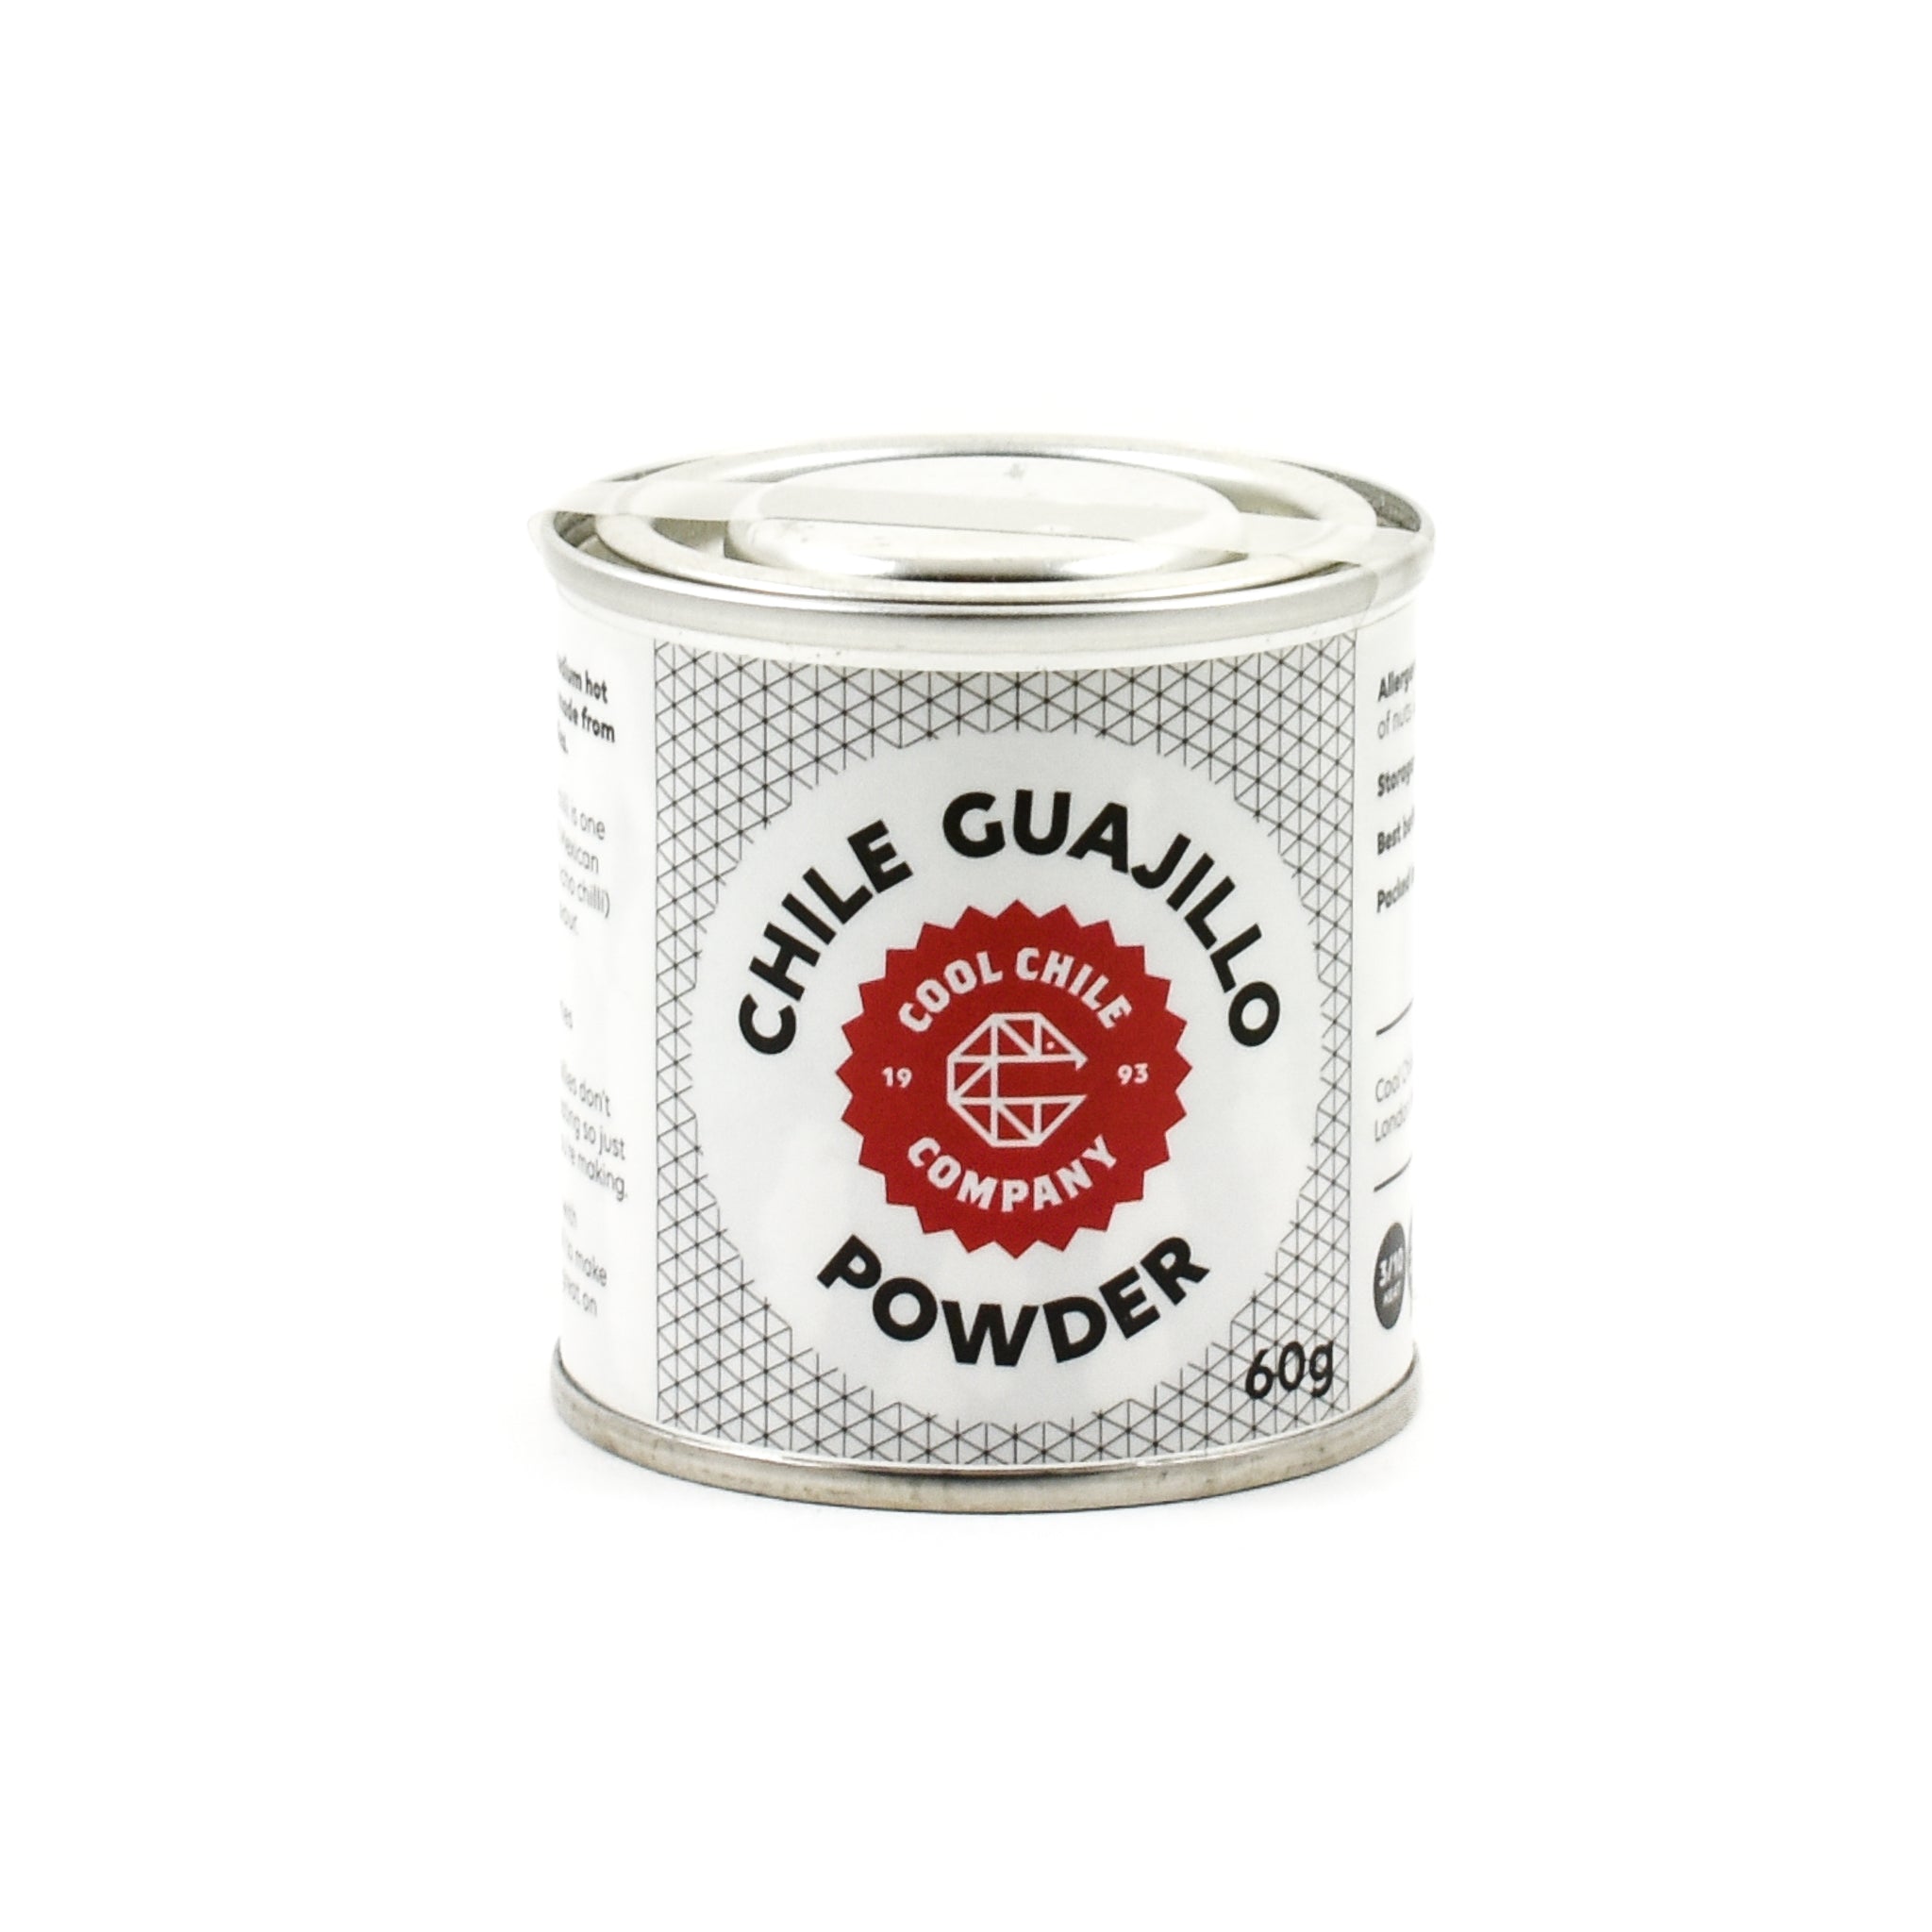 Cool Chile Co Guajillo Powder 60g Ingredients Herbs & Spices Dried Chillies Mexican Food